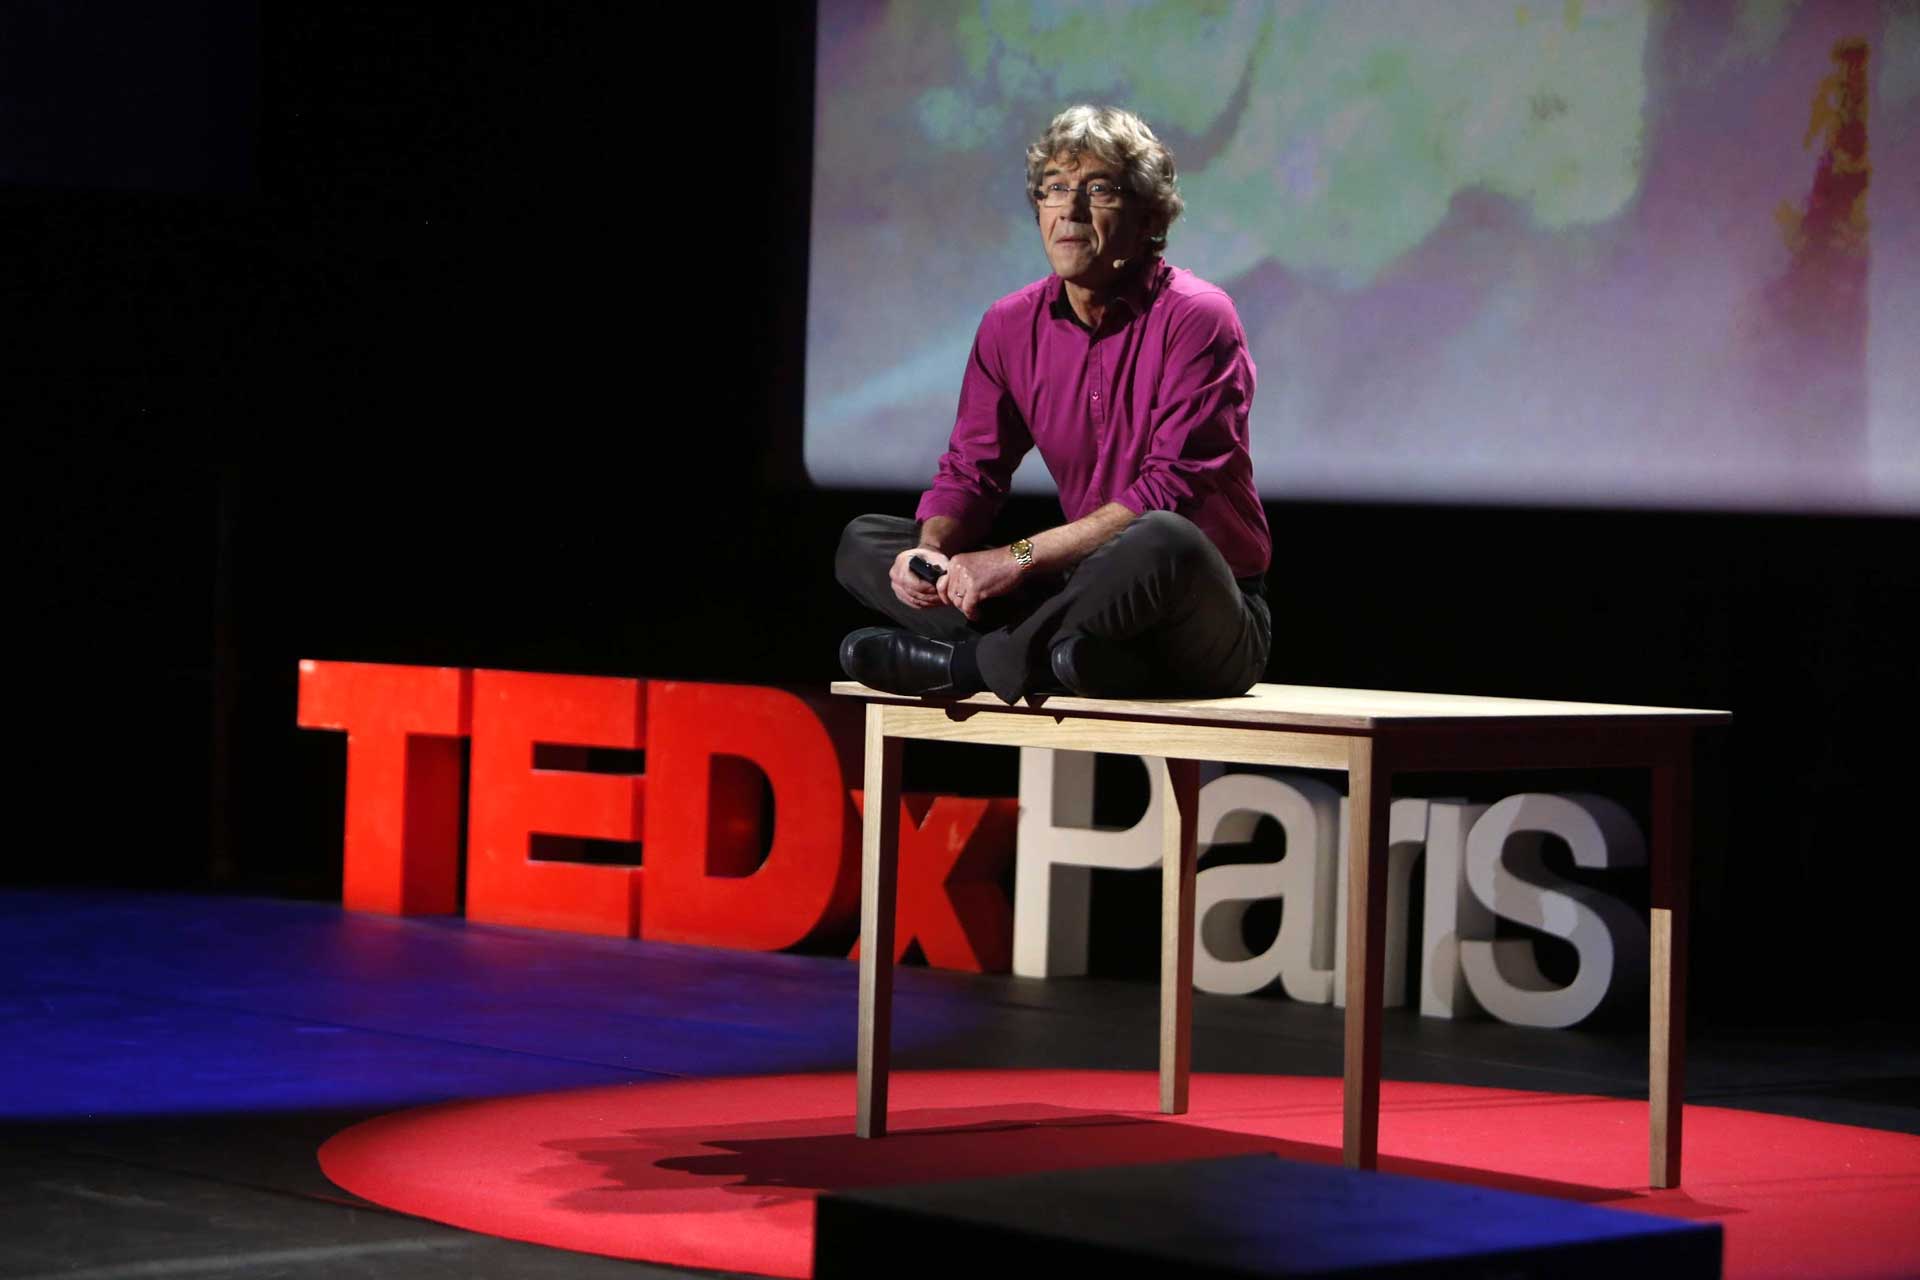 conference-TEDxParis-2013-4.jpg